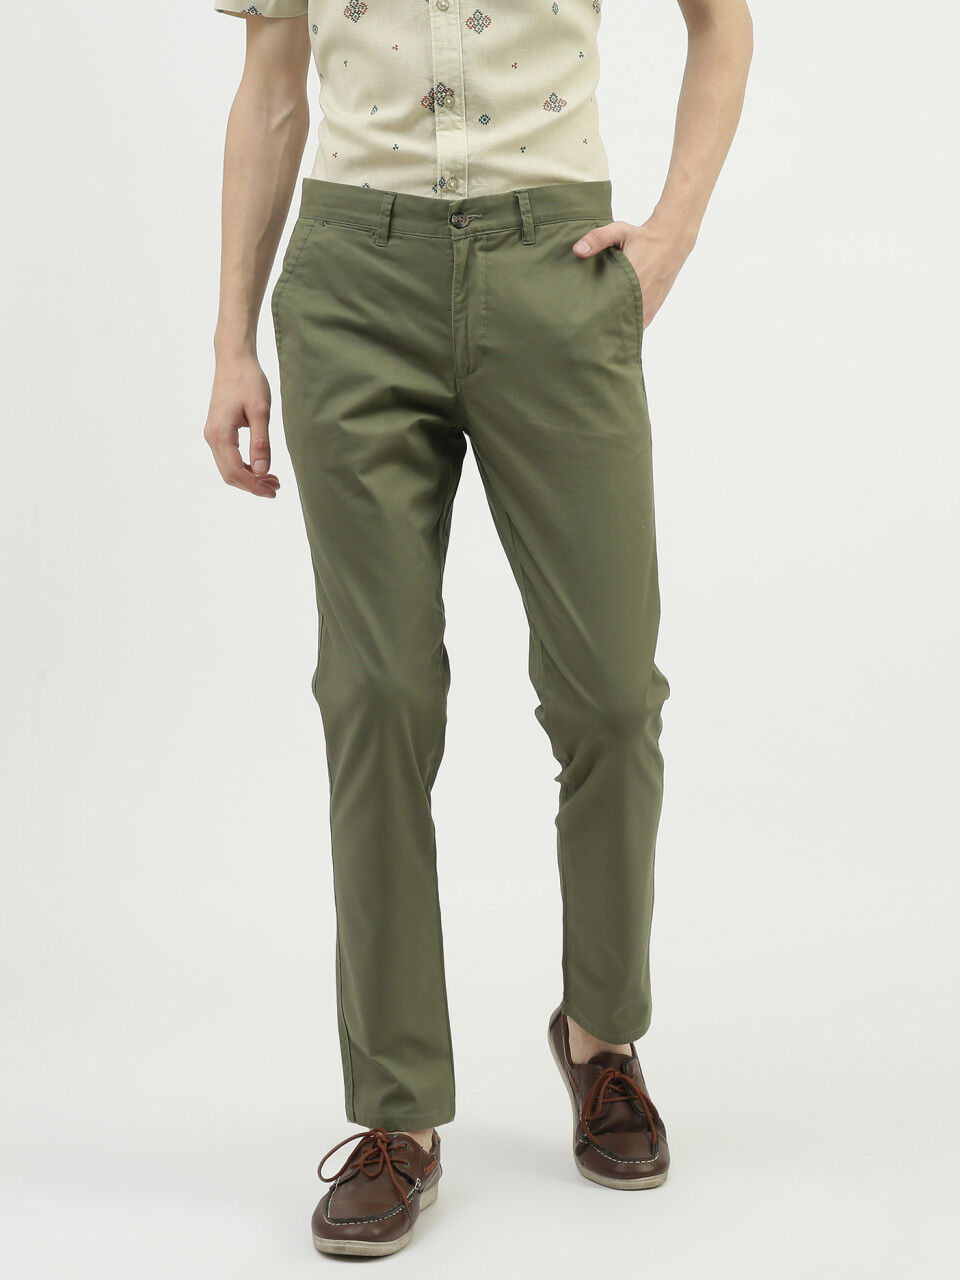 United Colors of Benetton Slim Fit Men Brown Trousers  Buy United Colors  of Benetton Slim Fit Men Brown Trousers Online at Best Prices in India   Flipkartcom